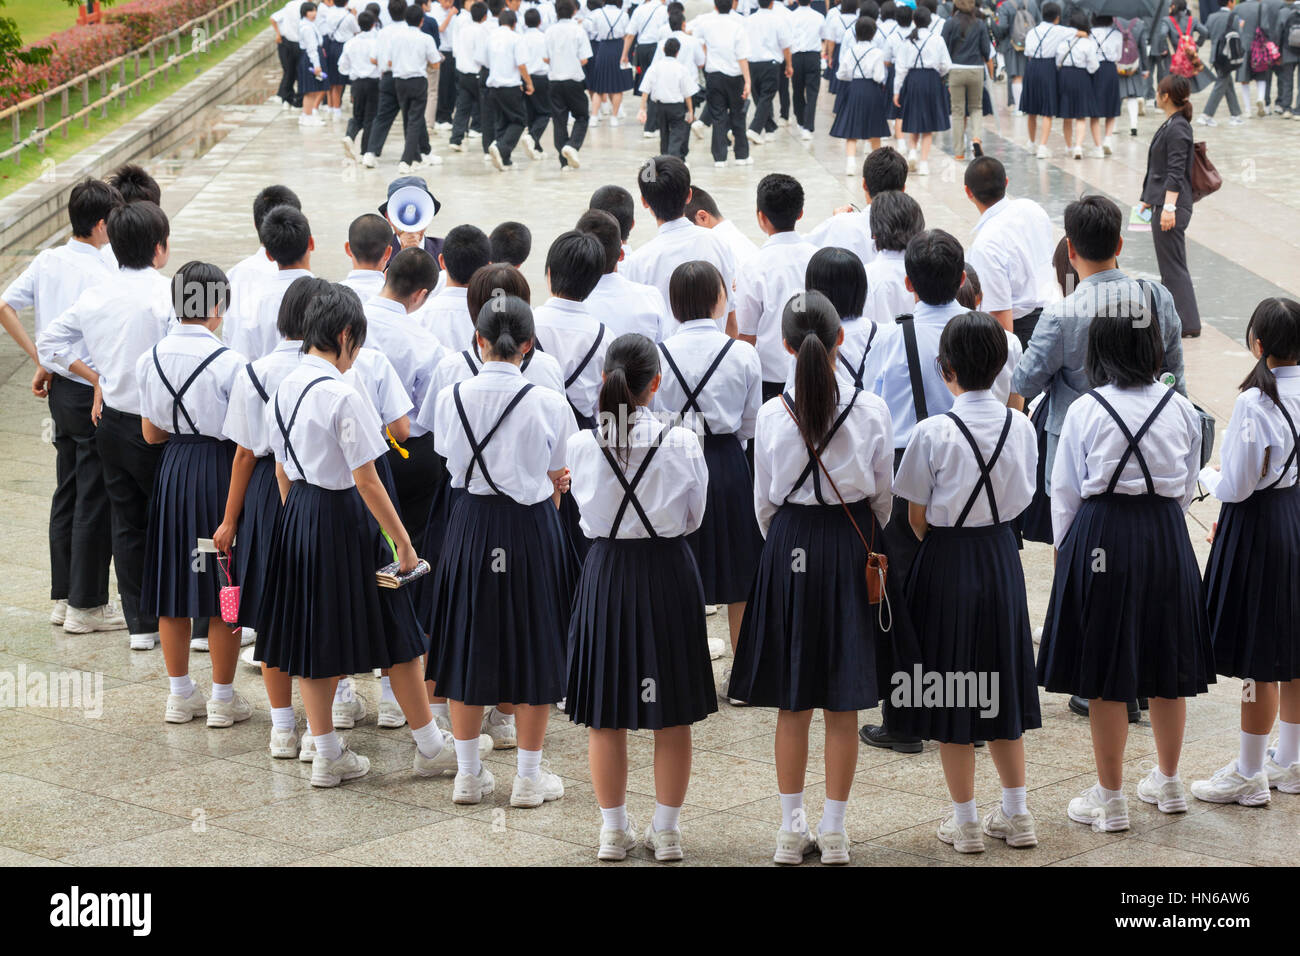 Nara, Japan - May 9, 2012: A large group of Japanese school children in uniforms and a guide with a loud hailer on a school trip to Todai-ji temple in Stock Photo